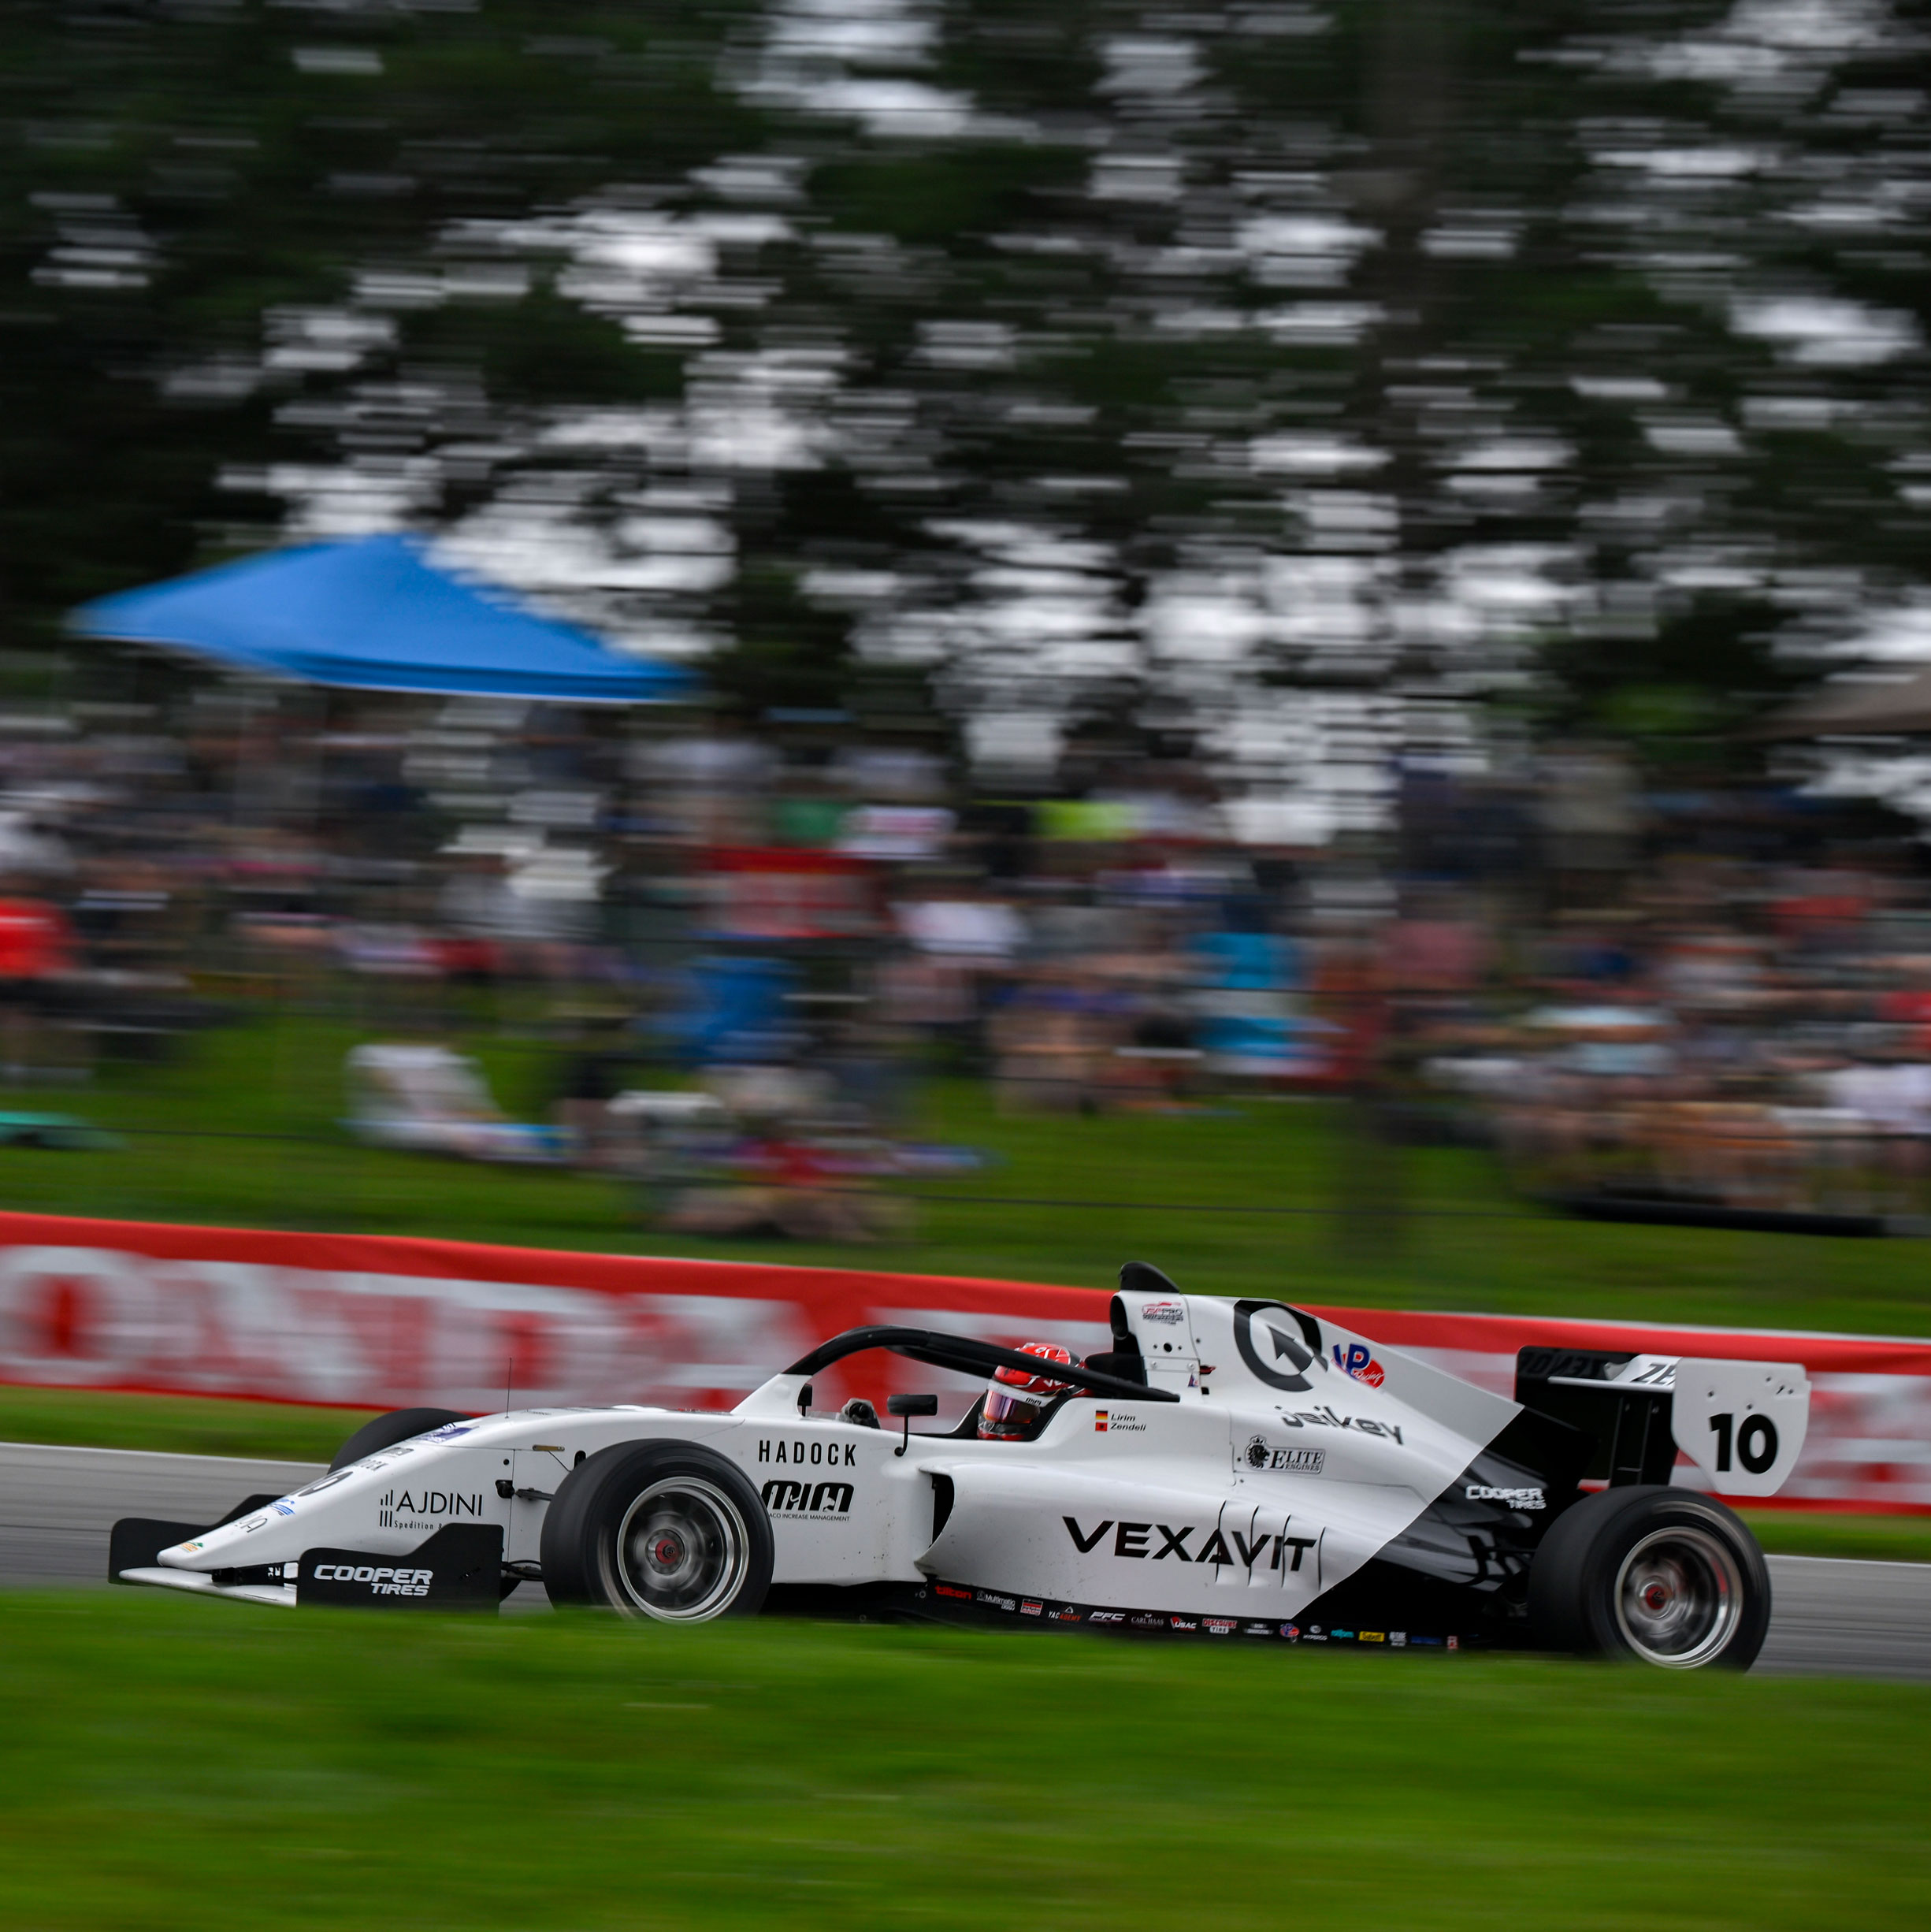 ZENDELI COMPLETES MID-OHIO WEEKEND WITH DOUBLE POINT FINISH